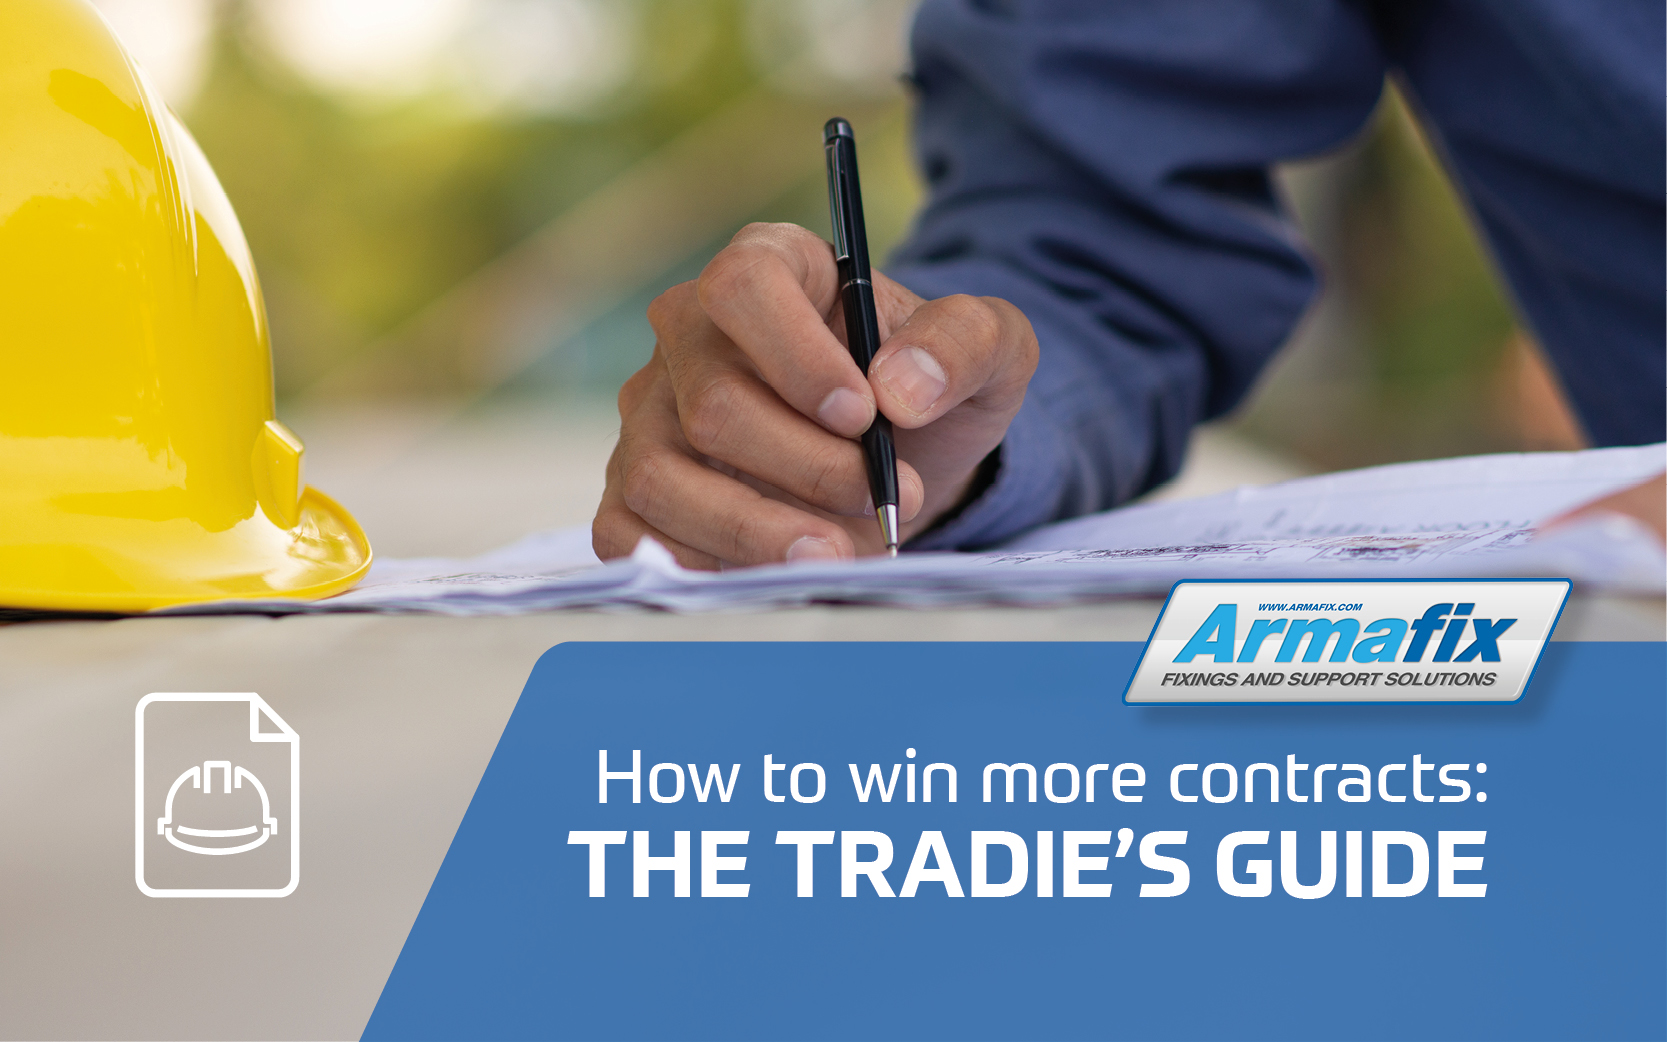 The Tradesman’s Guide to Winning More Work Contracts